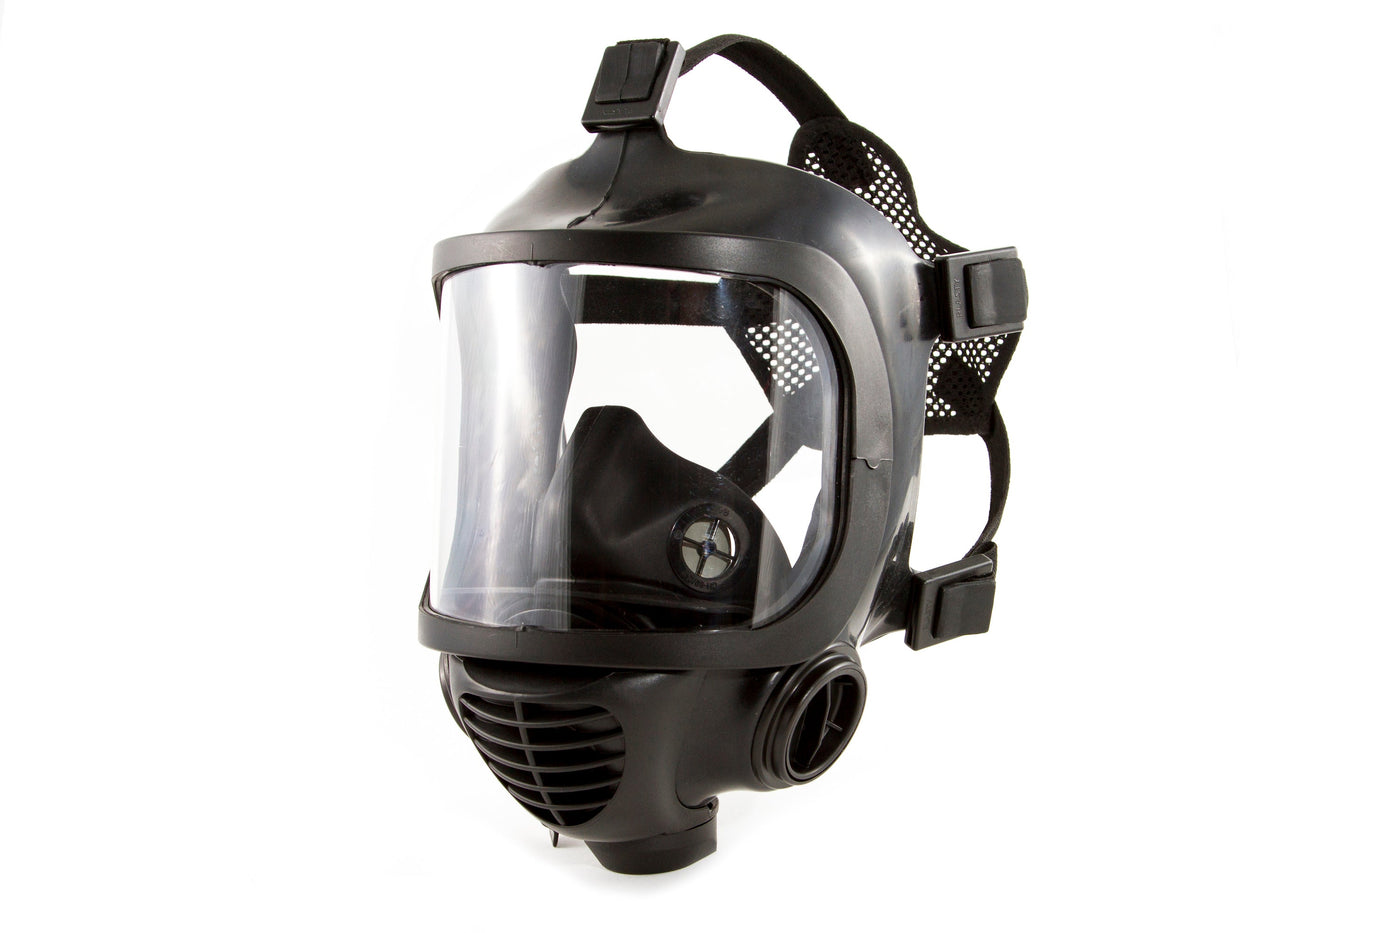 Three quarter view of the CM-6M tactical gas mask